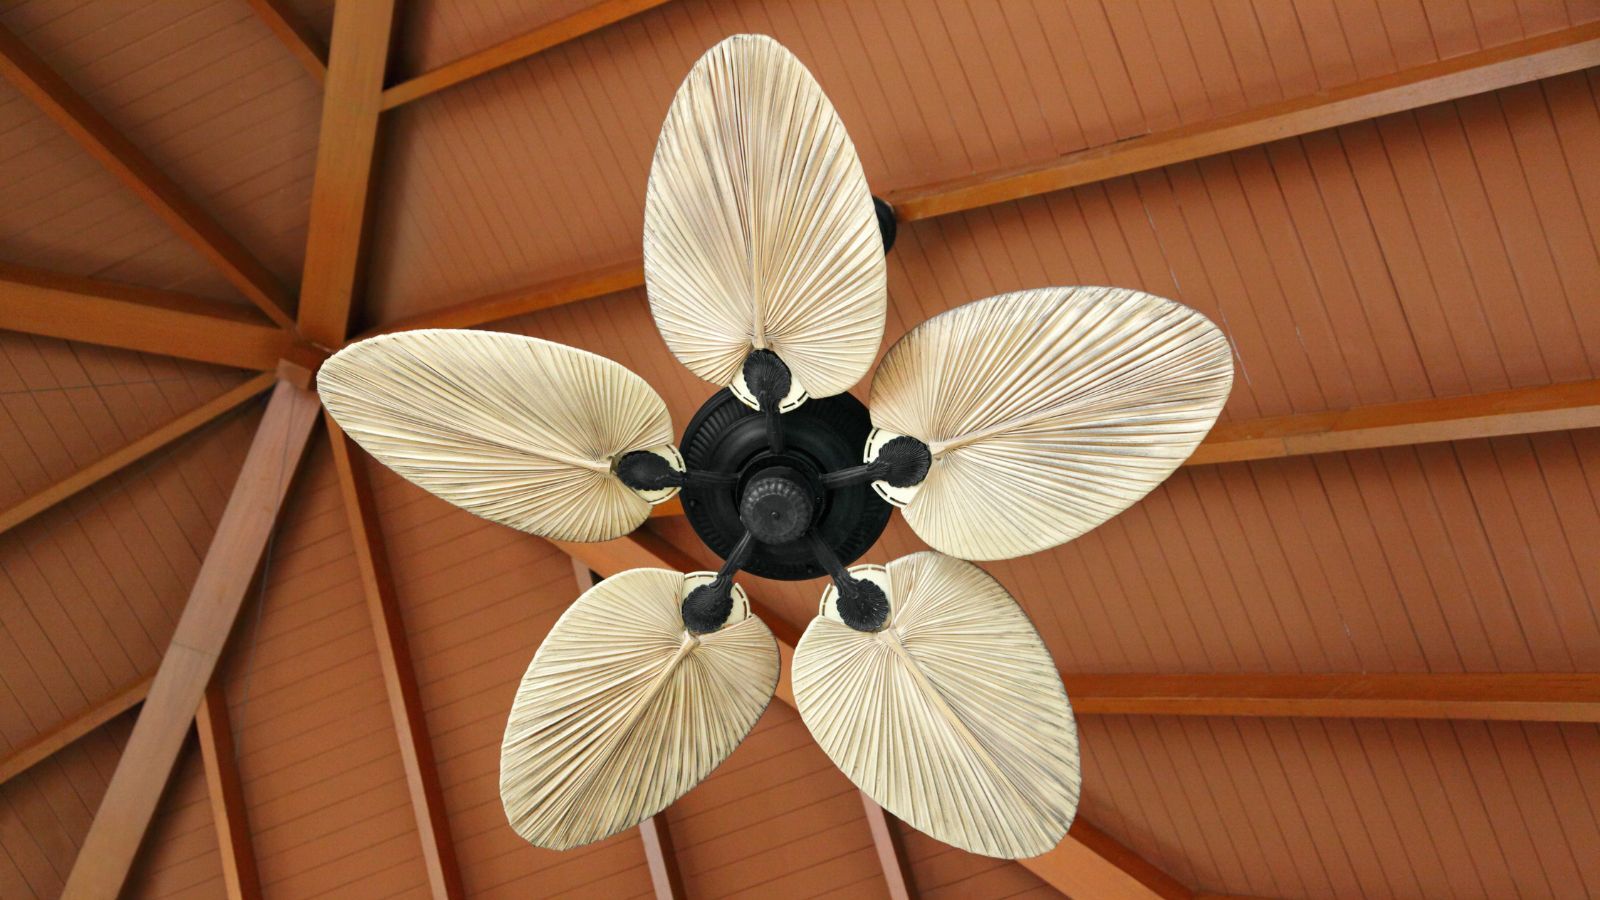 12 Best Ceiling Fan Brands to Keep You Cool This Summer